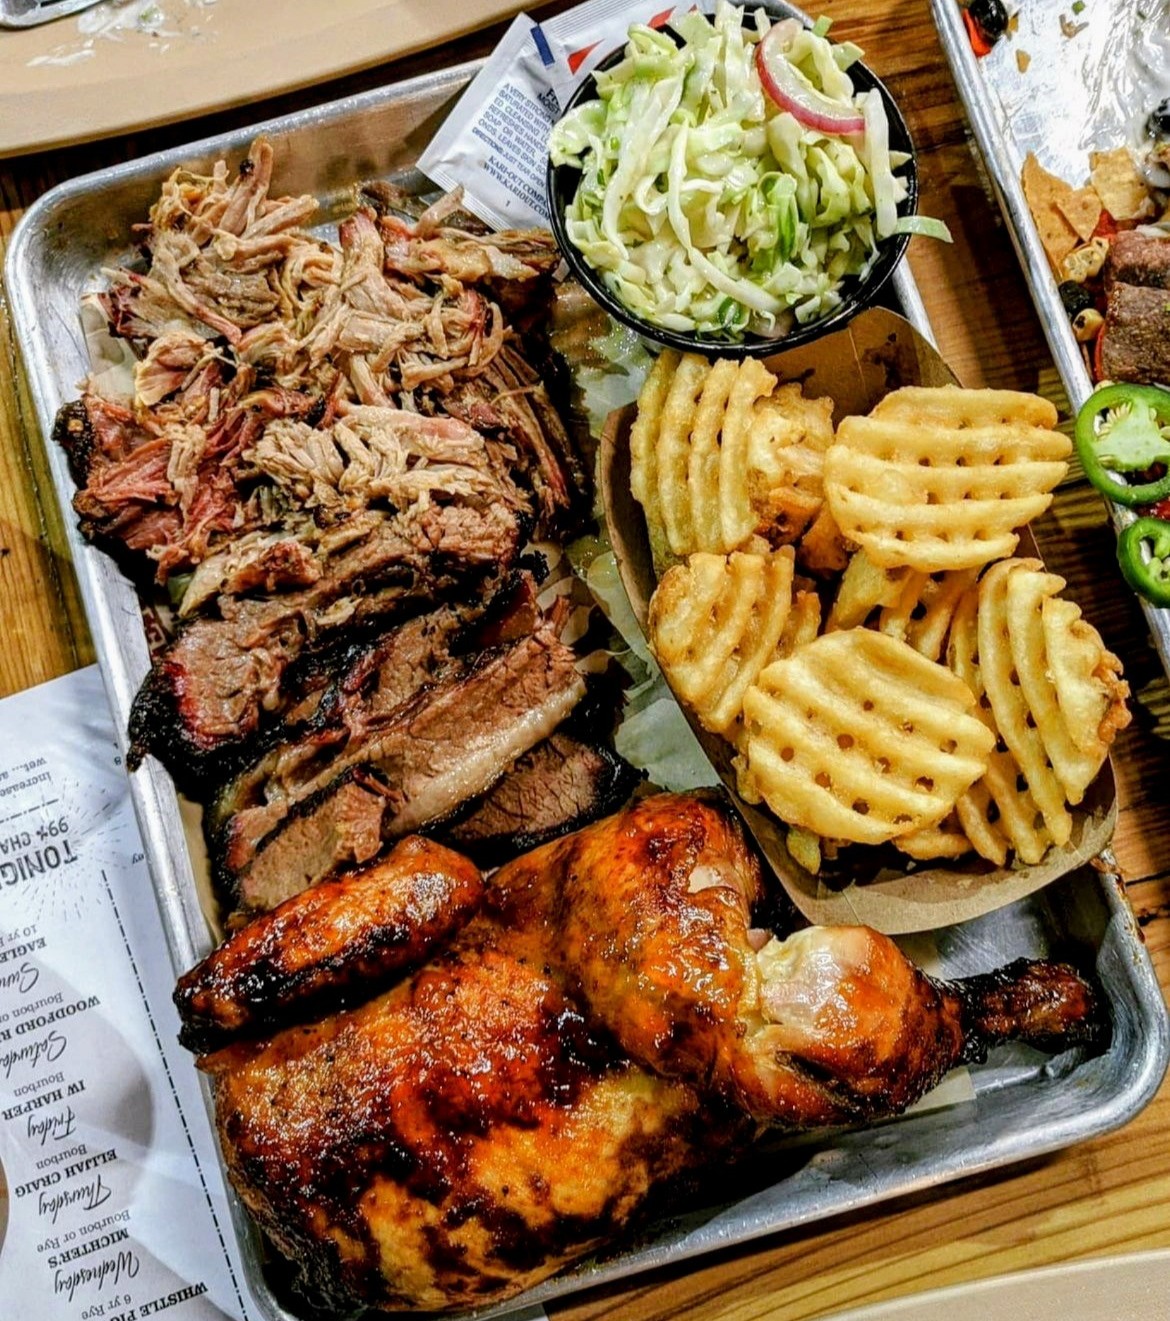 Barbecue items photographed next to sides of waffle fries and Cole slaw